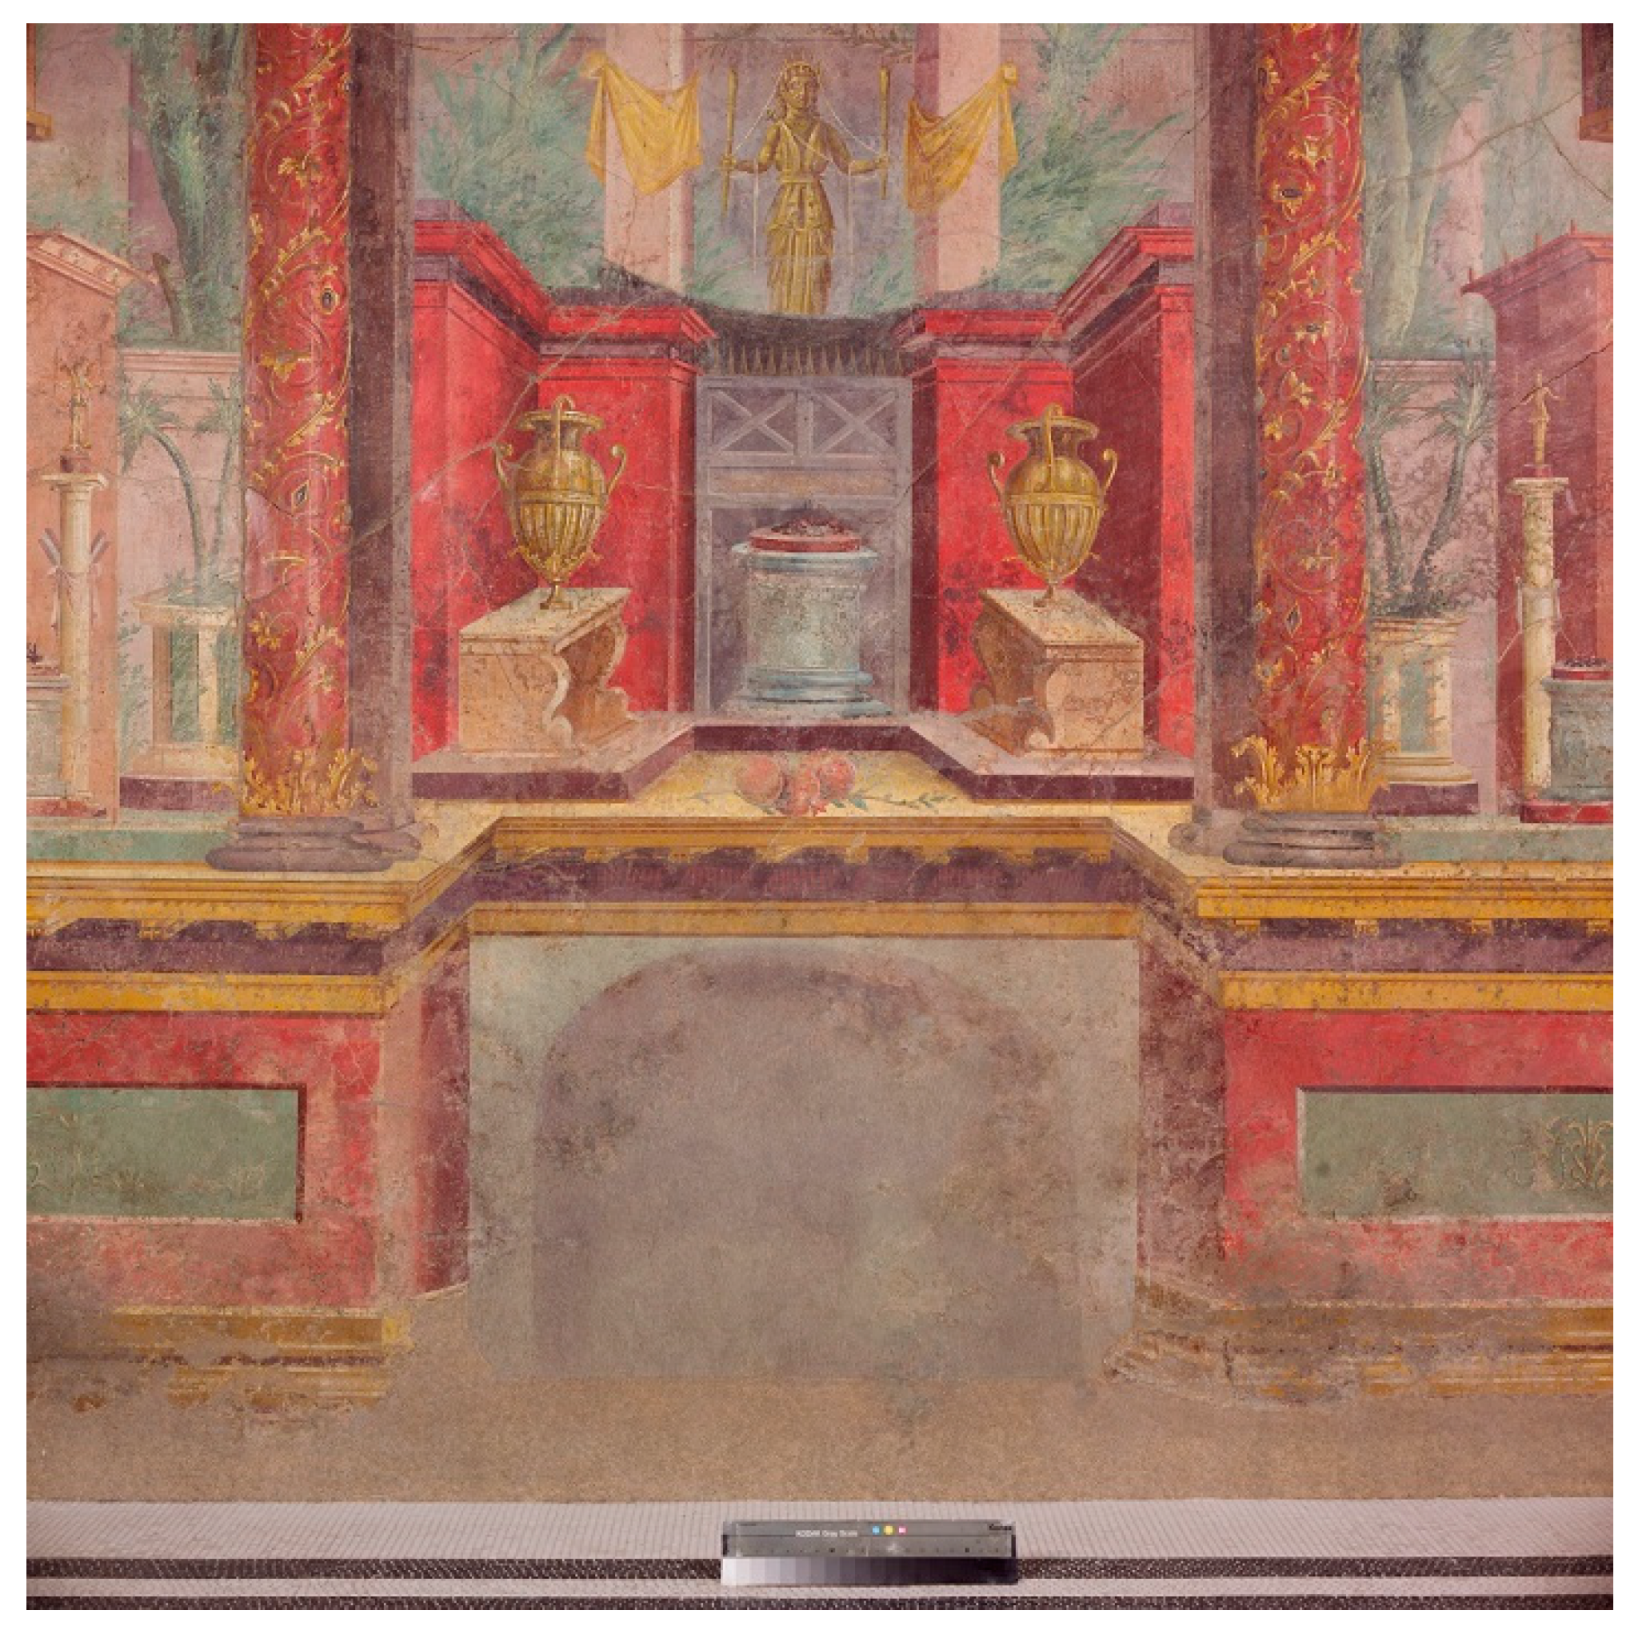 Arts | Free Full-Text | Spatial Dimensions in Roman Wall Painting and the  Interplay of Enclosing and Enclosed Space: A New Perspective on Second Style